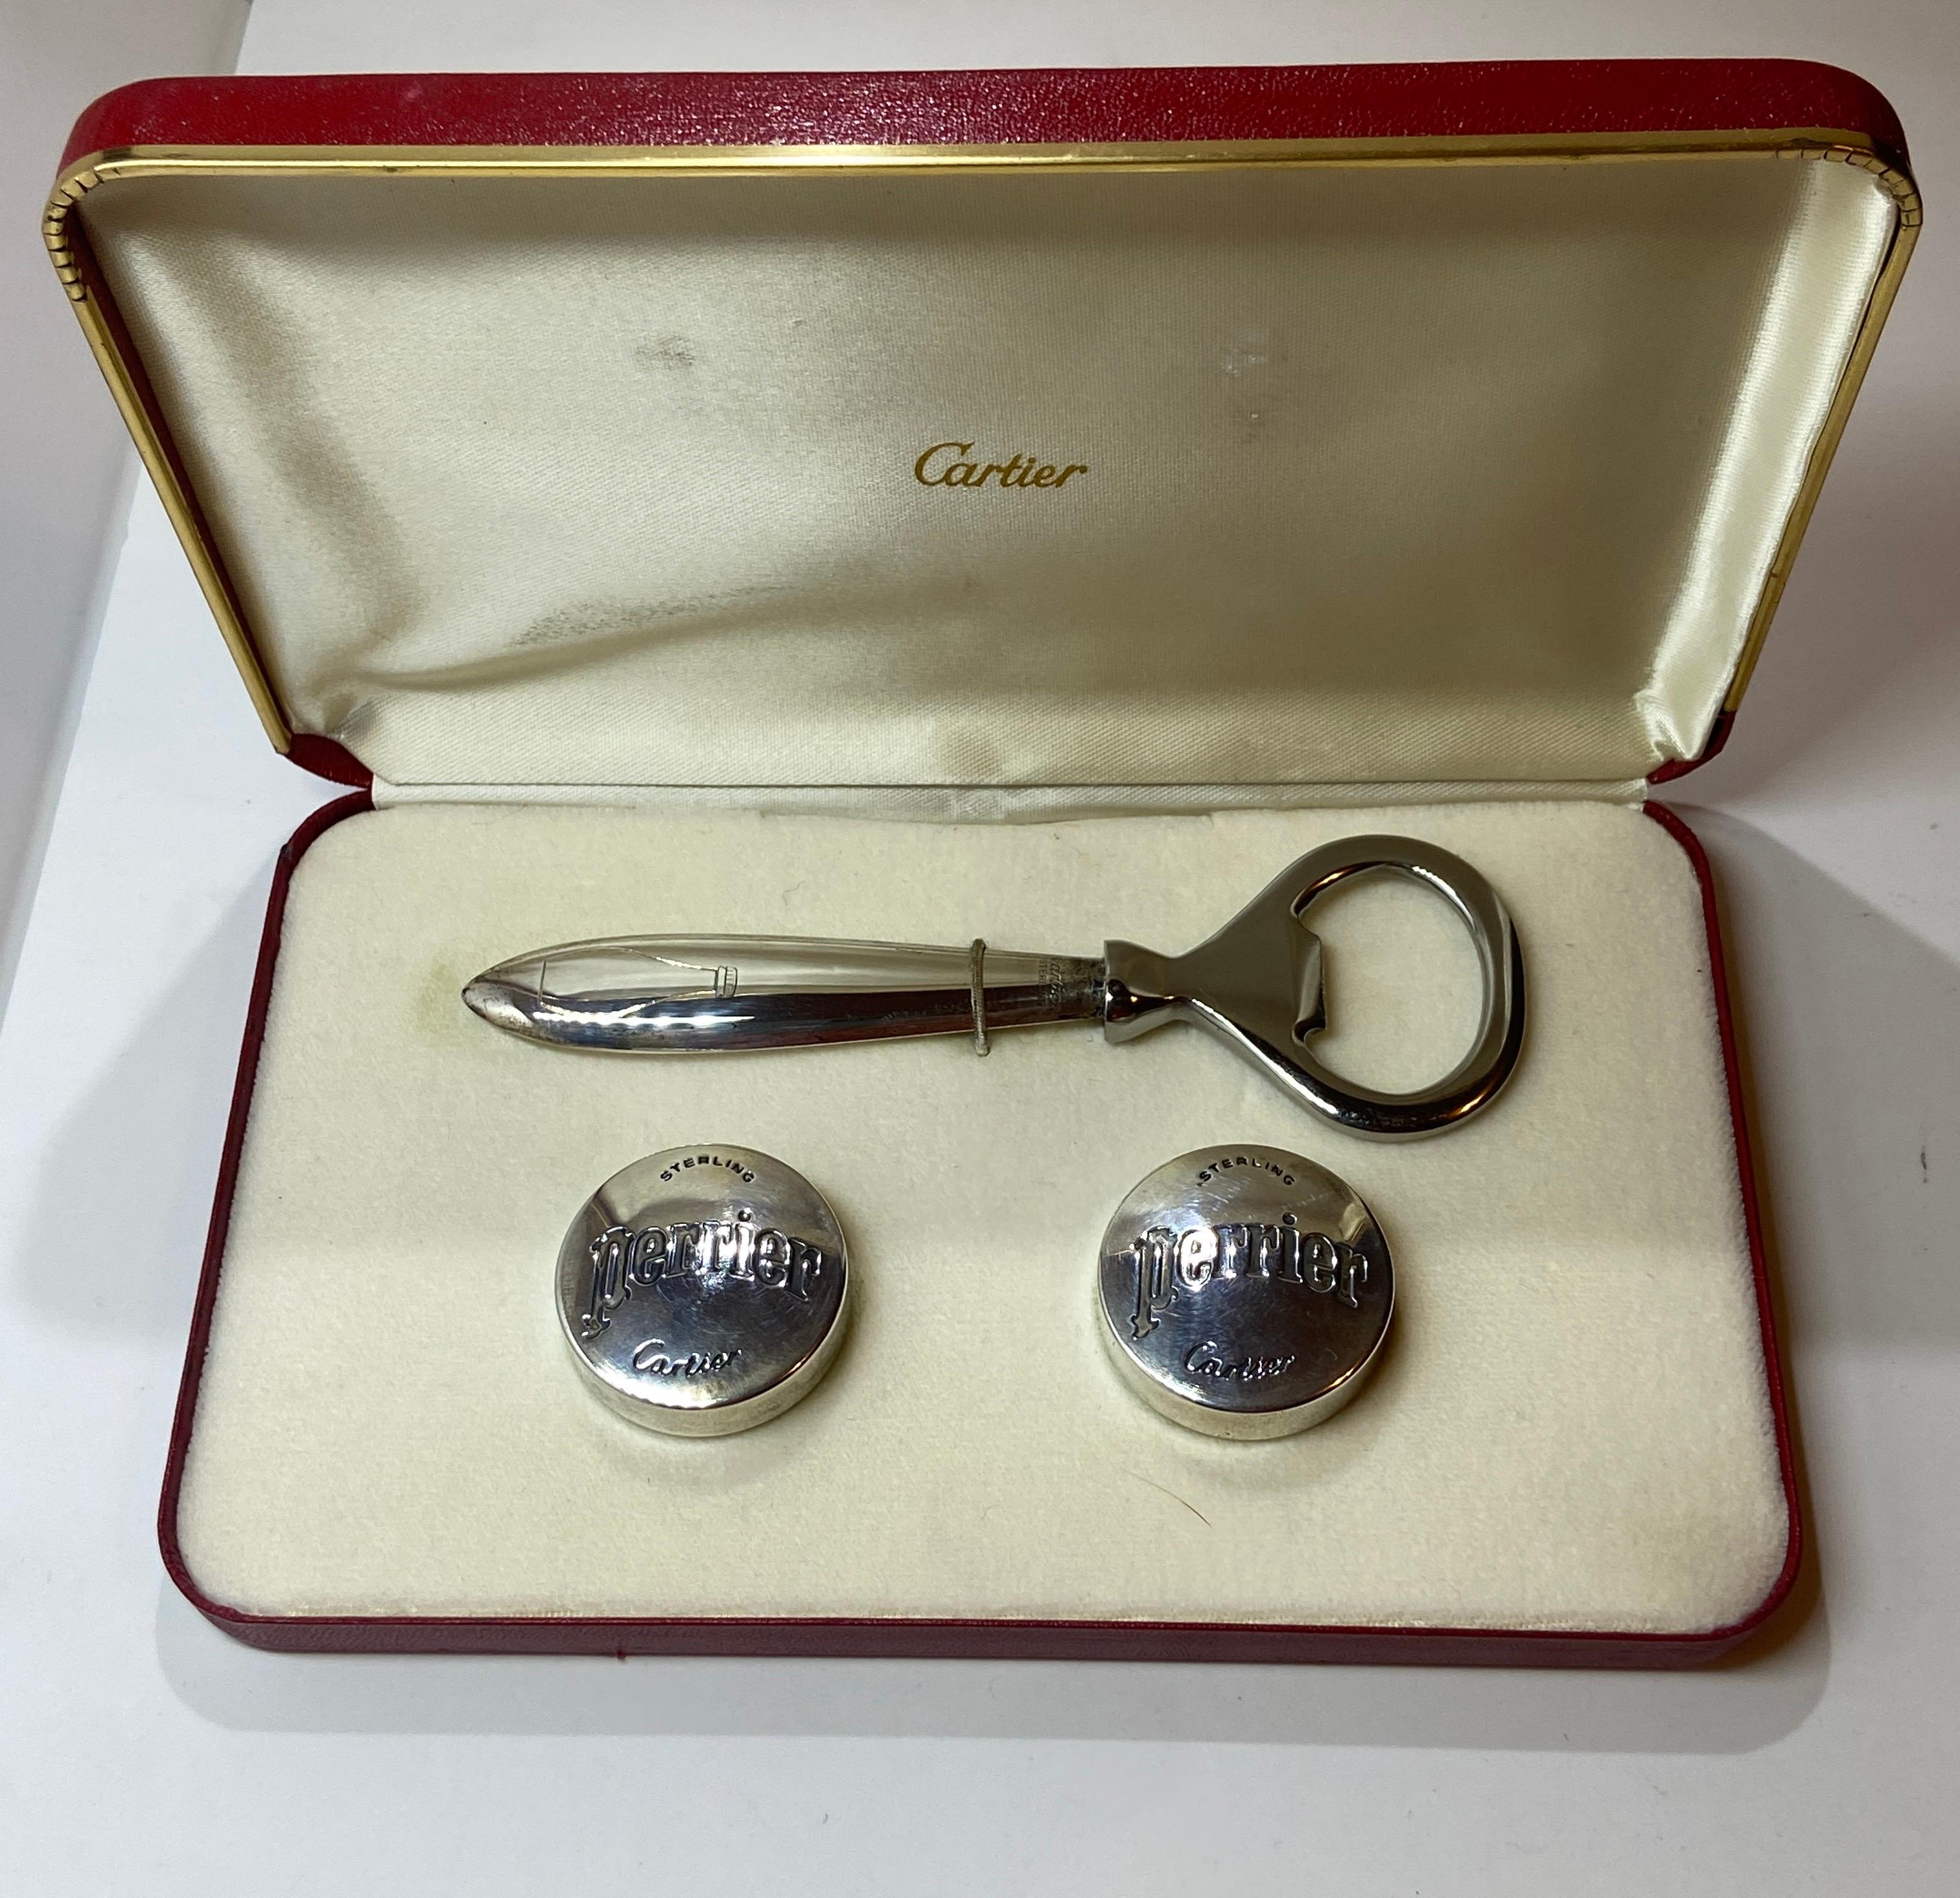 Cartier Boxed Sterling Silver Set of Perrier Bottle Caps and Bottle Opener For Sale 6